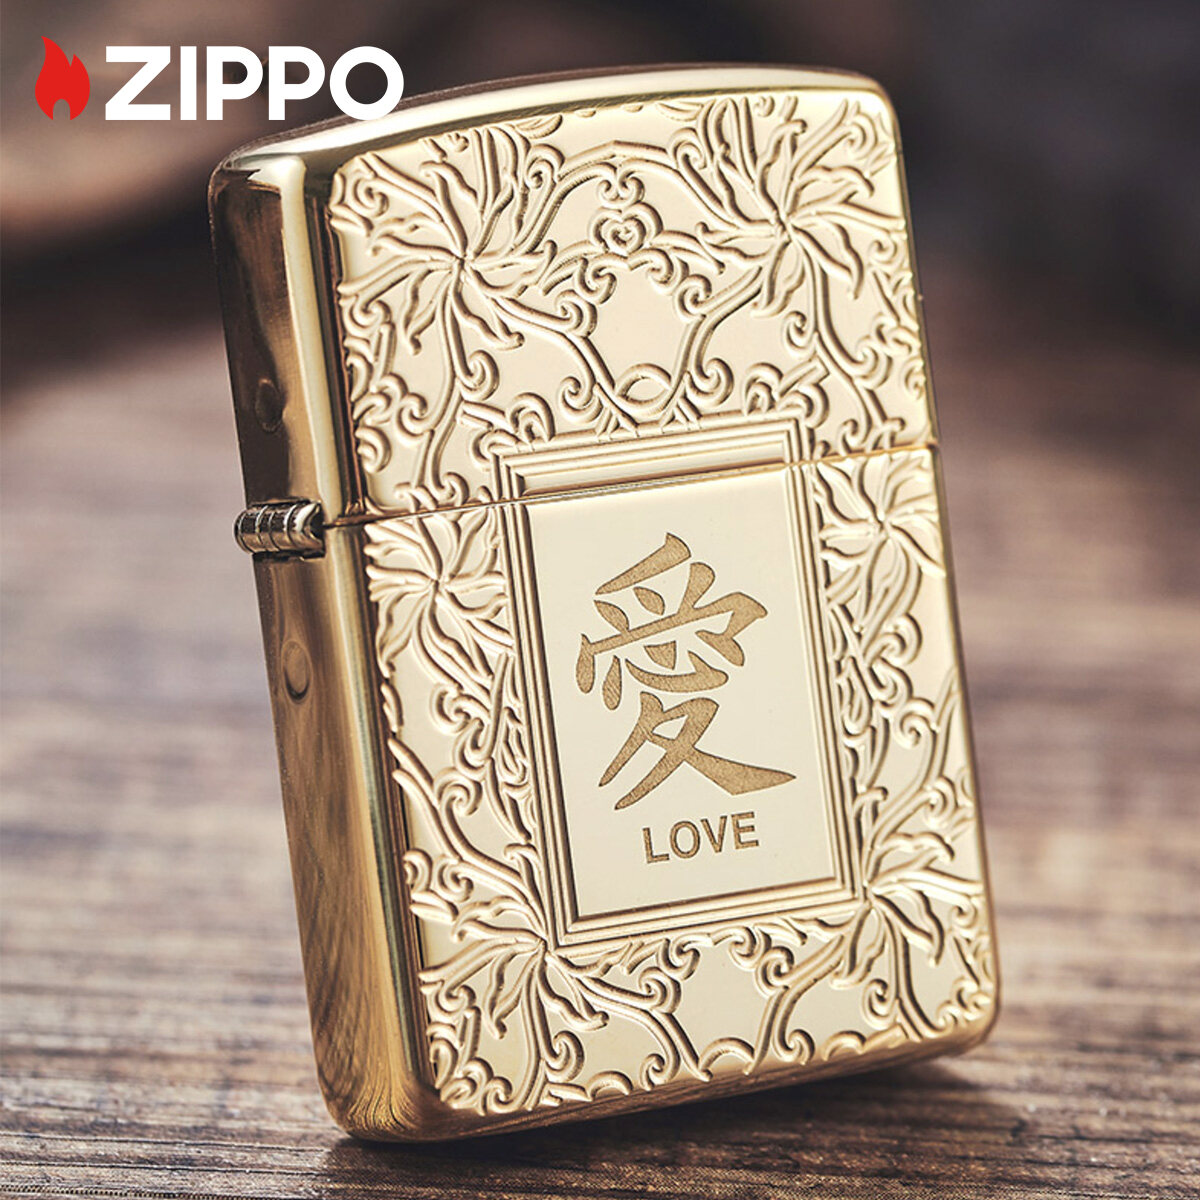 Zippo Limited Edition Founder's Day Design Windproof Pocket Lighter |Zippo  48167 (Lighter Without Fuel Inside) Lazada Singapore